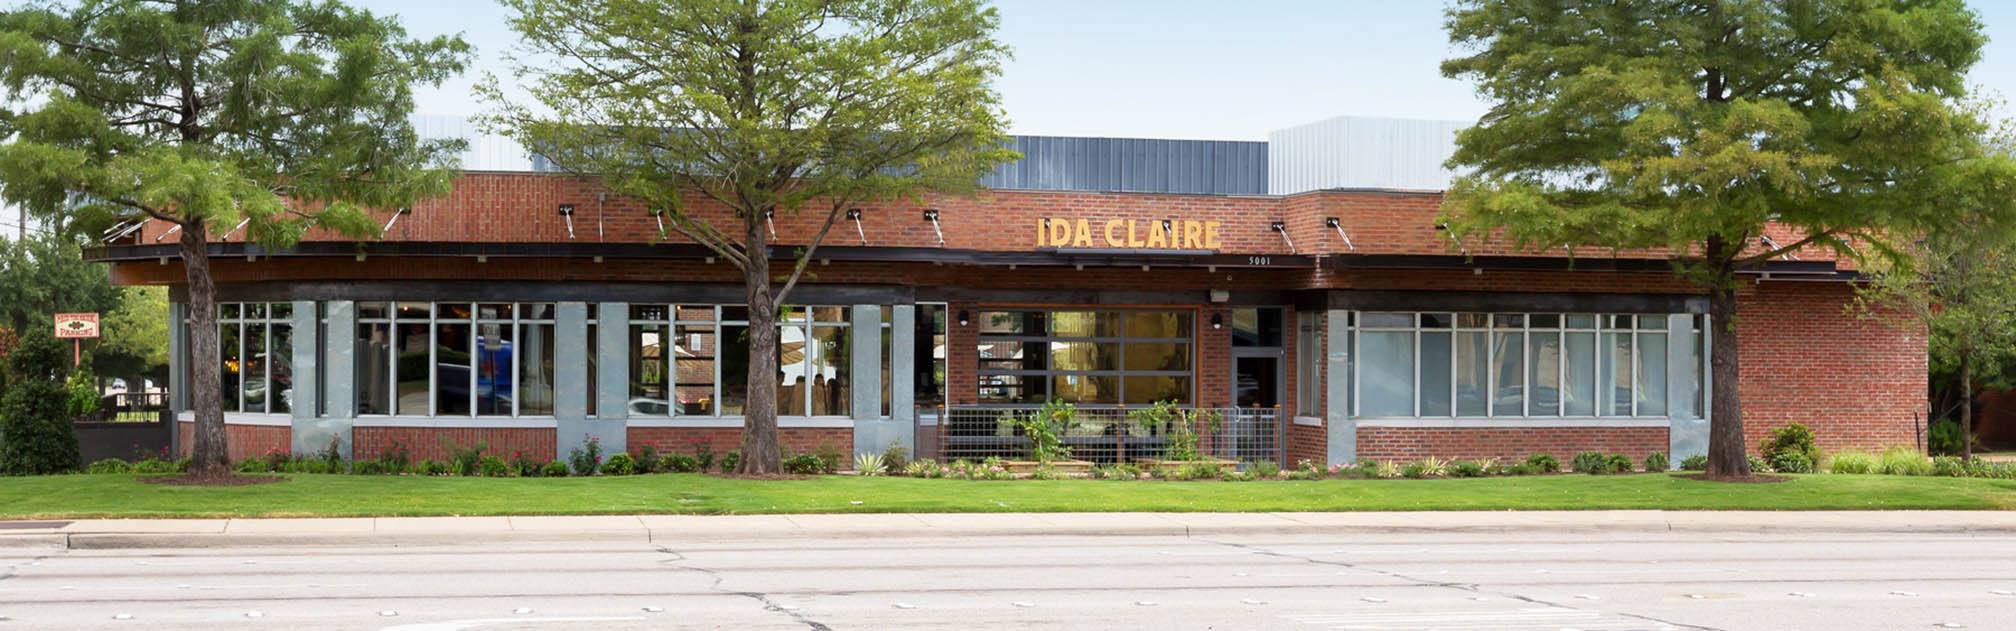 Ida Claire - Commercial Landscaping